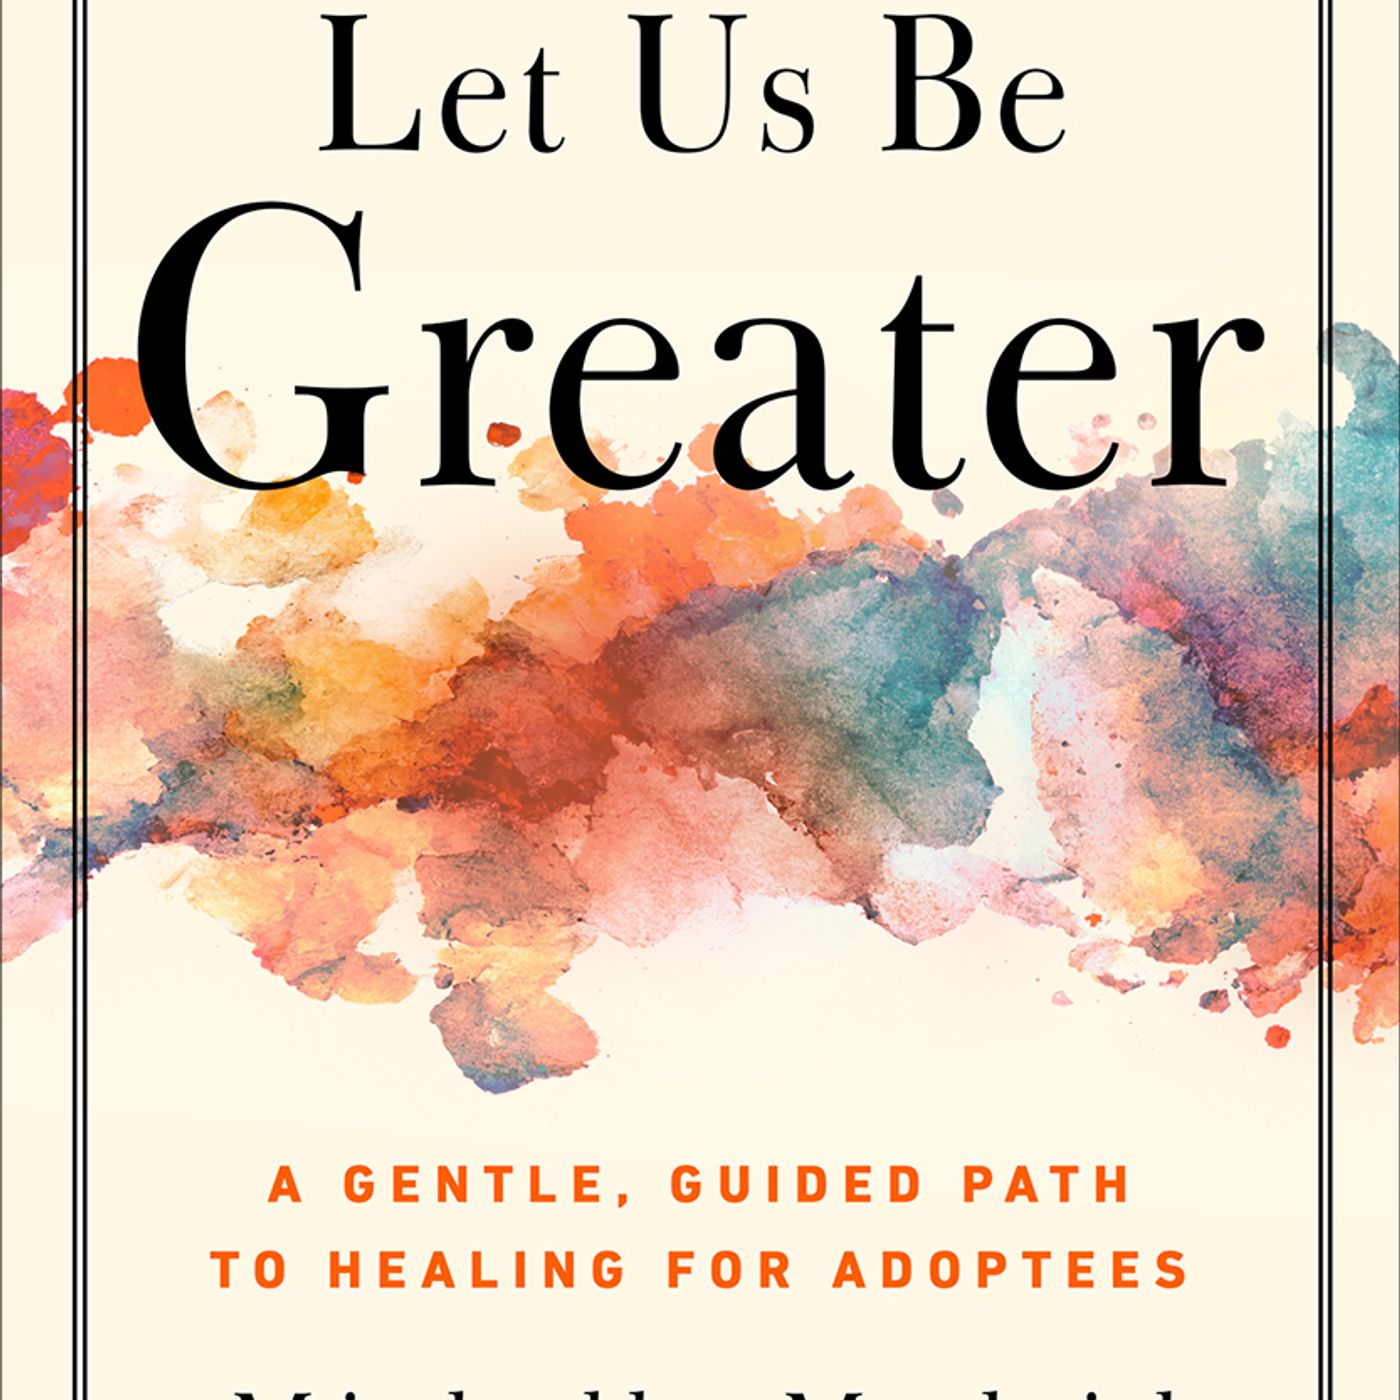 Healing for Adoptees